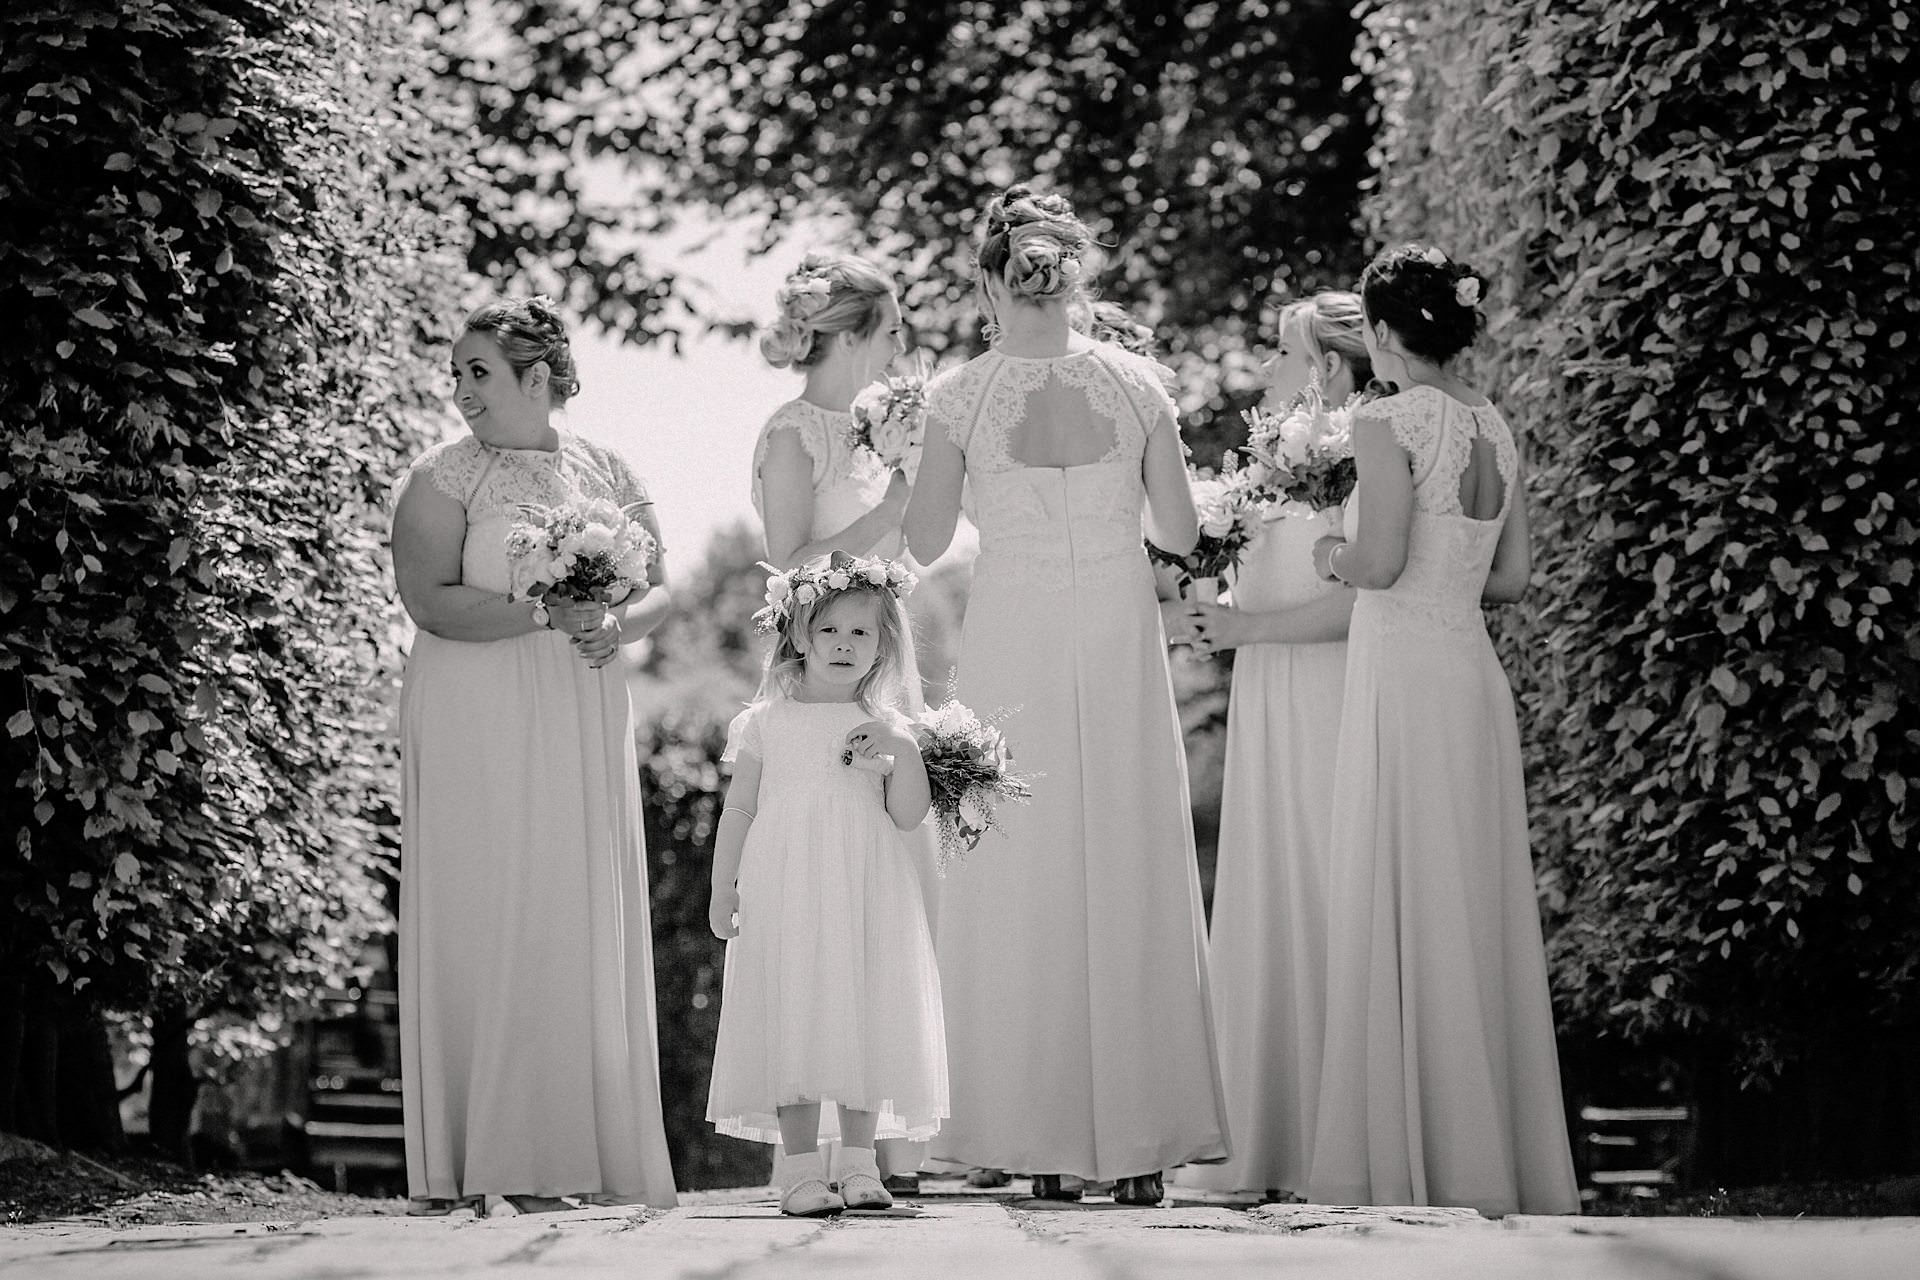 image of the bridesmaids and flower girl in black and white